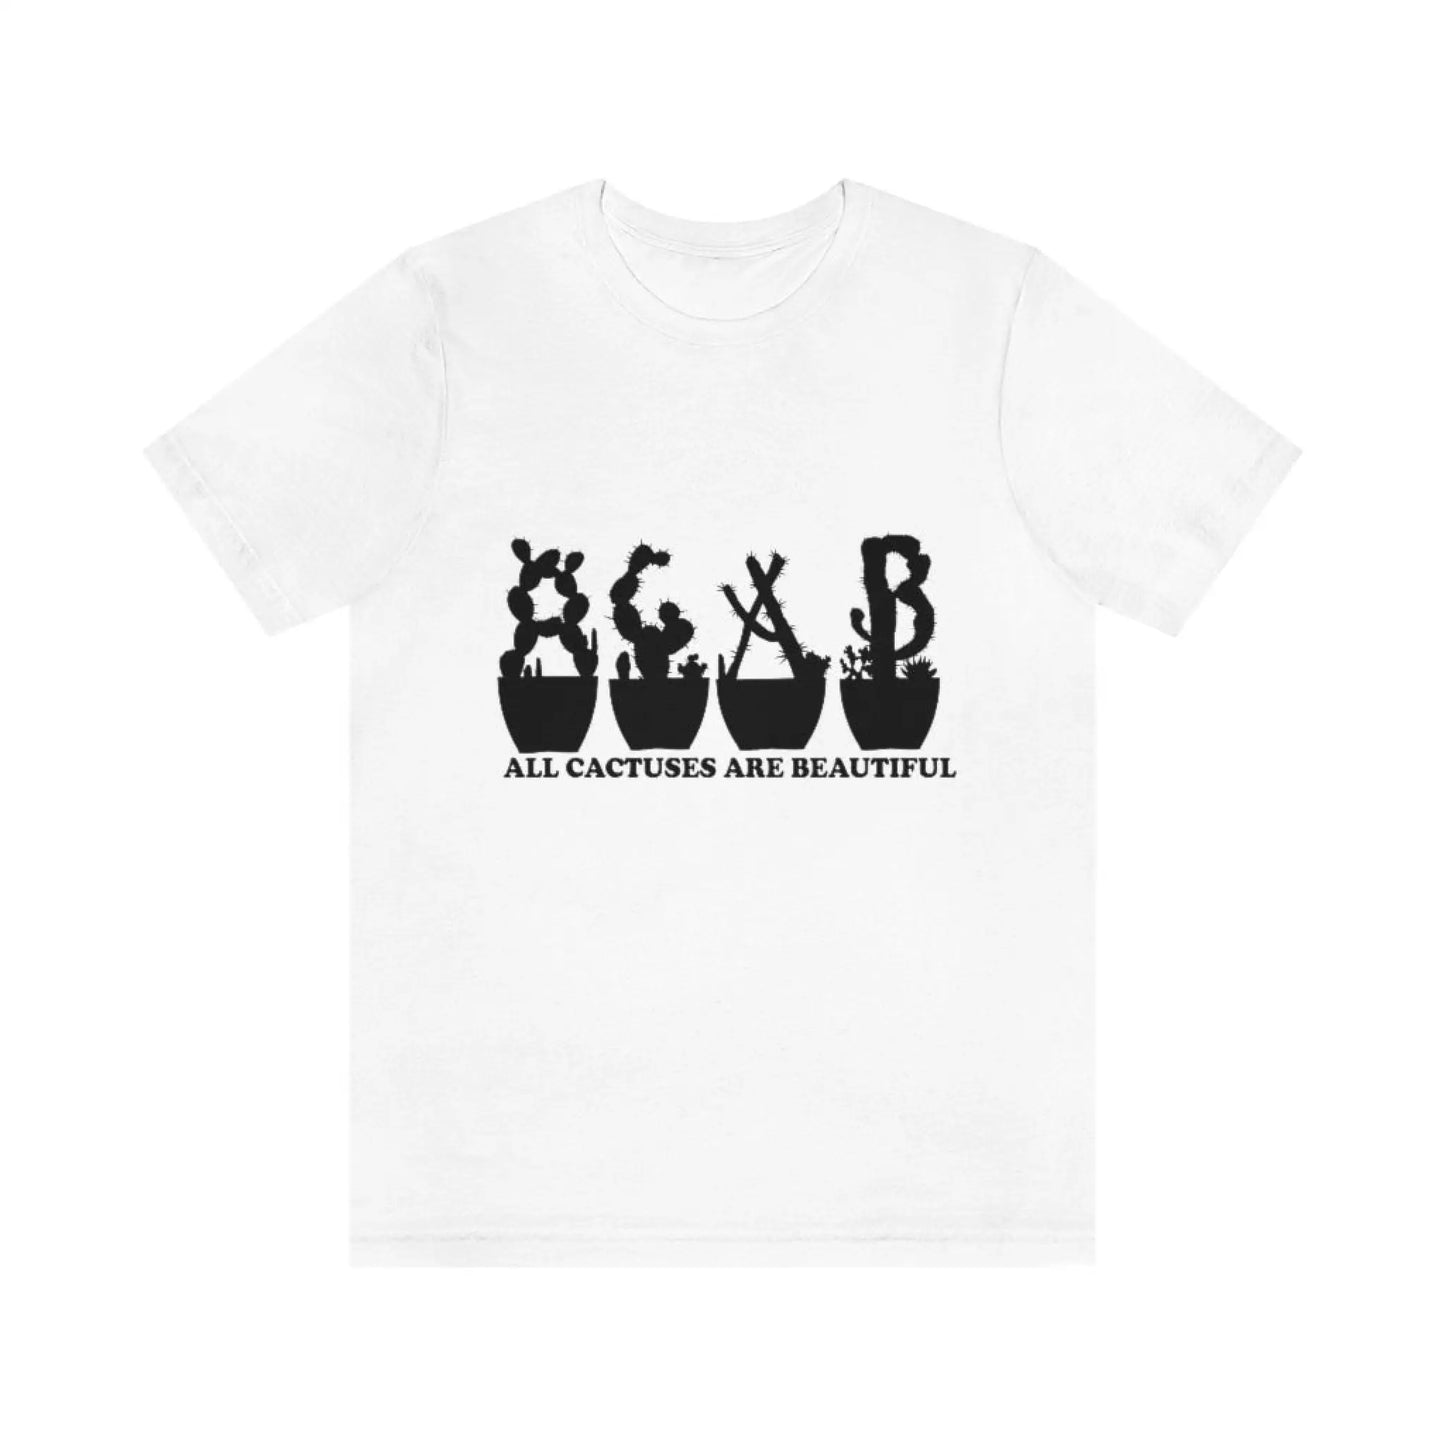 Shirts XL - All Cactuses Are Beautiful - White / T-Shirt